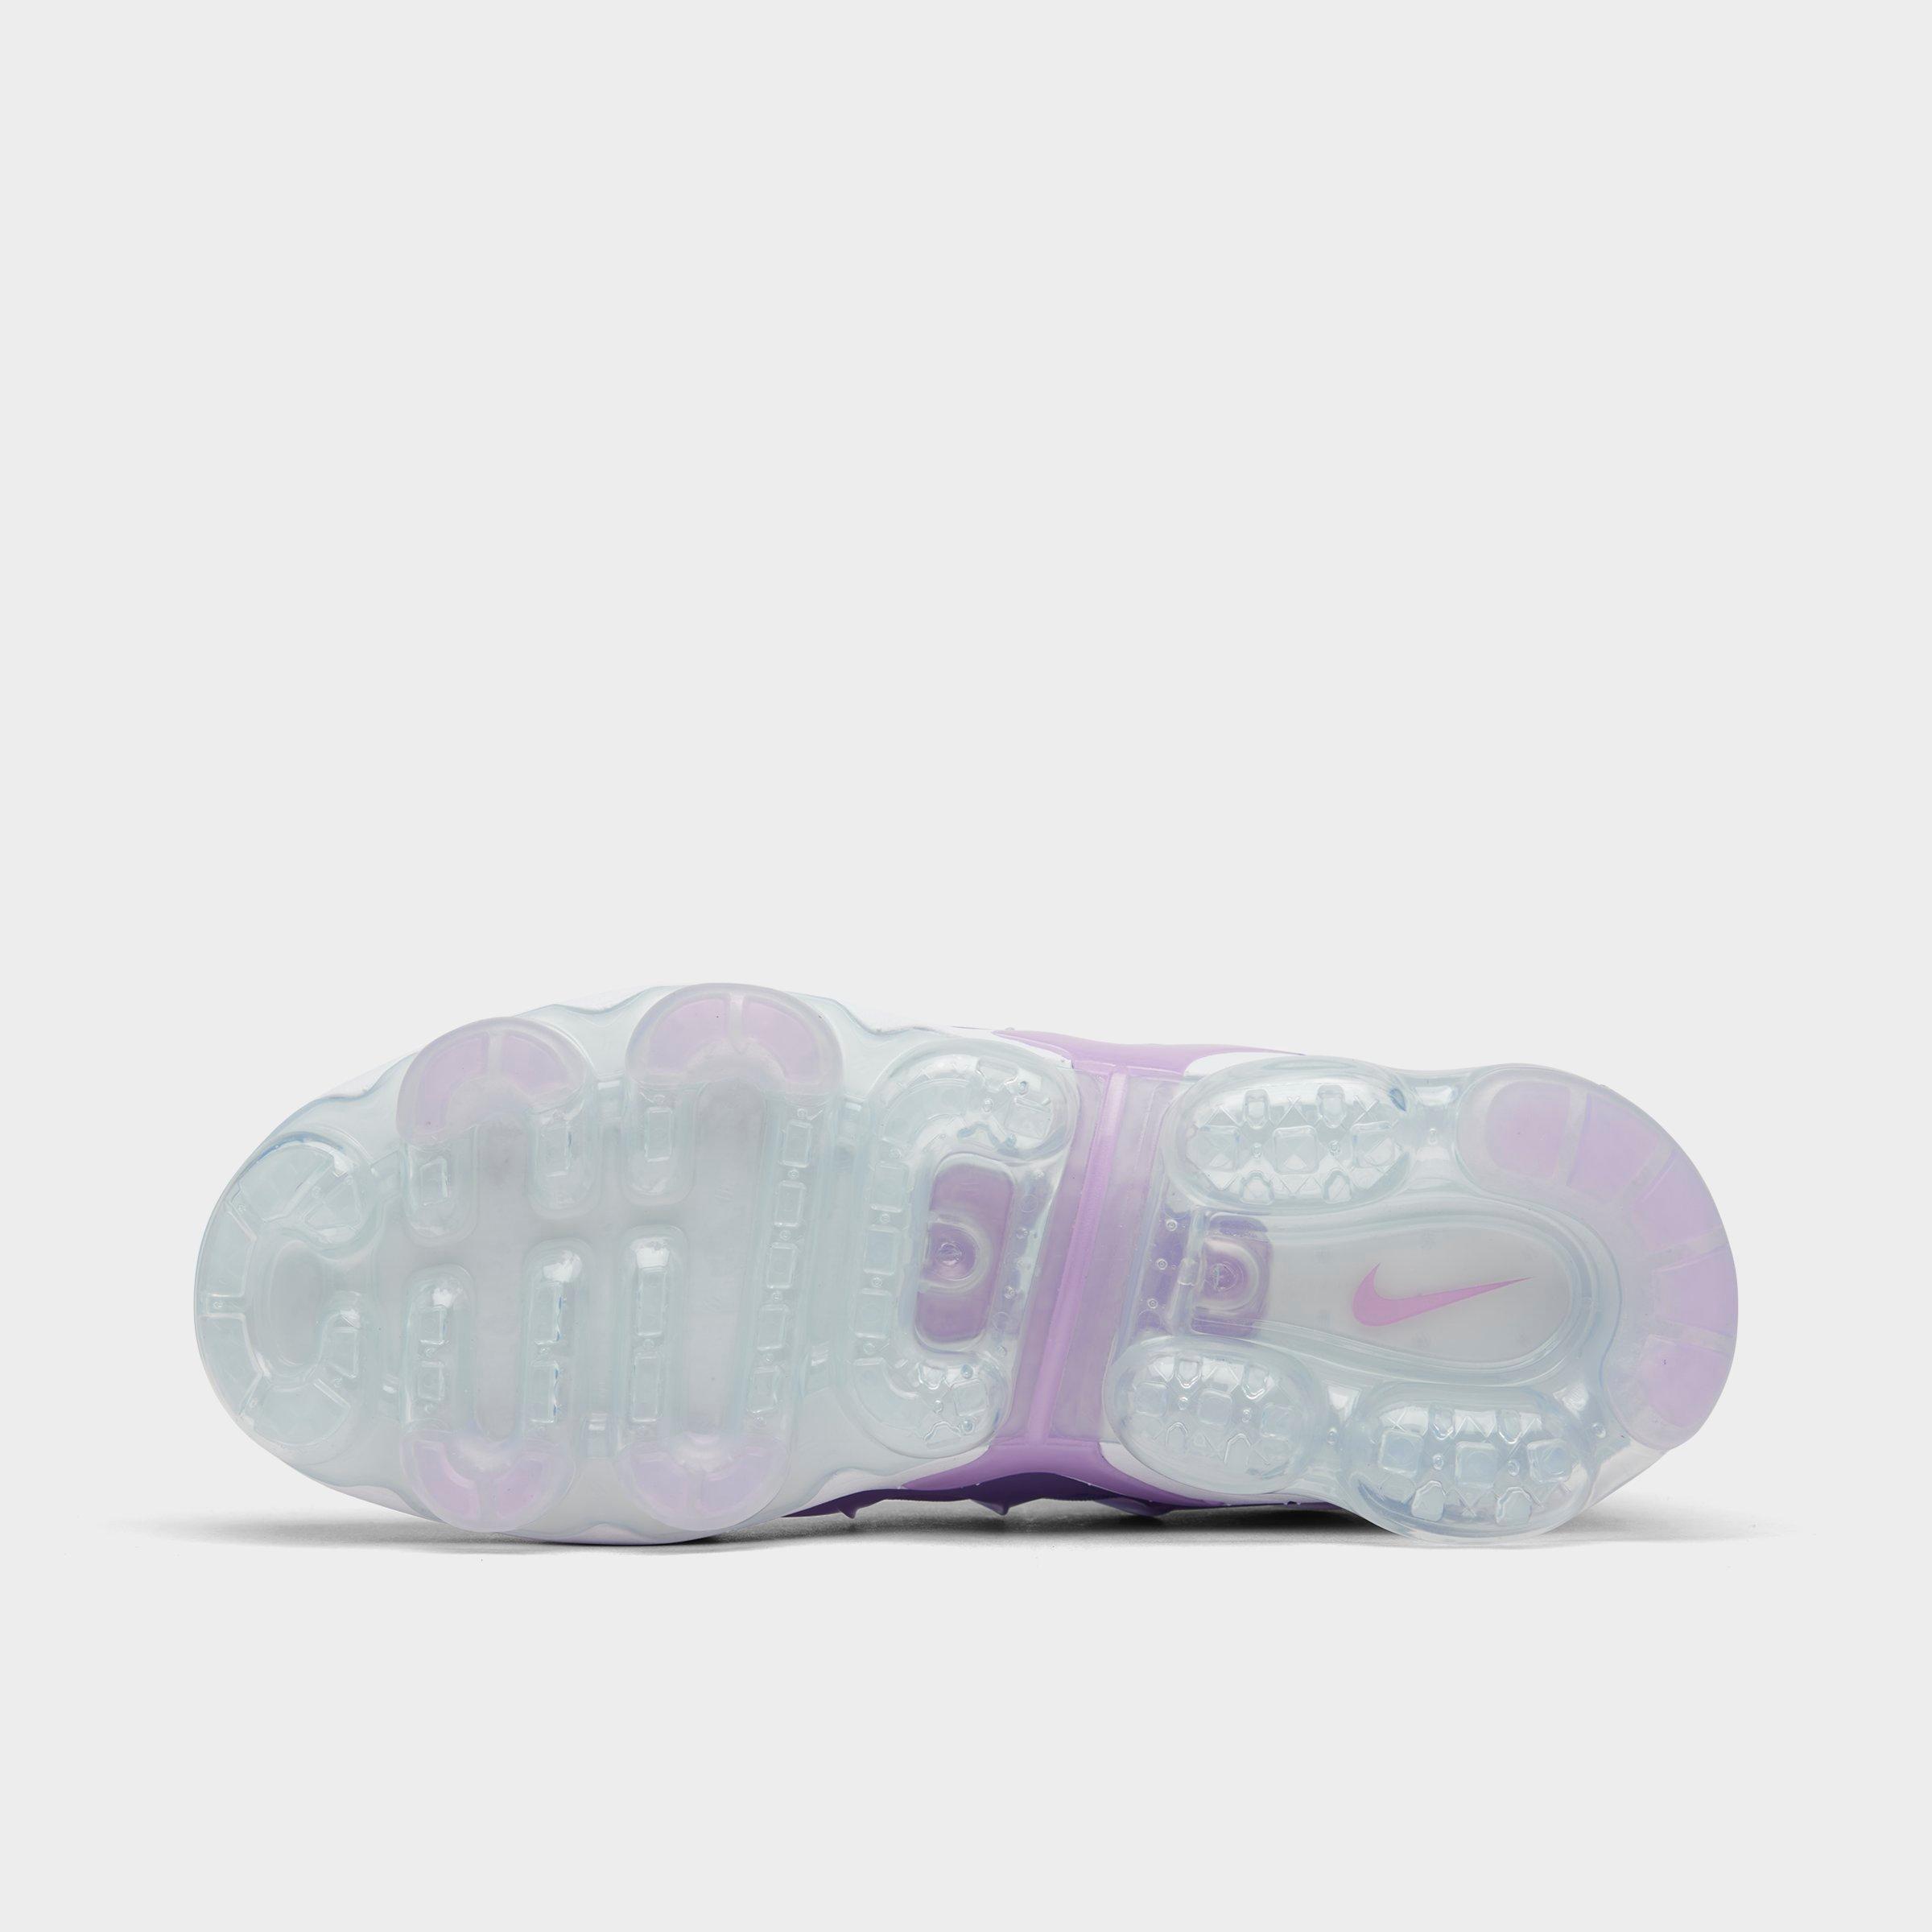 vapormax with pink bottom